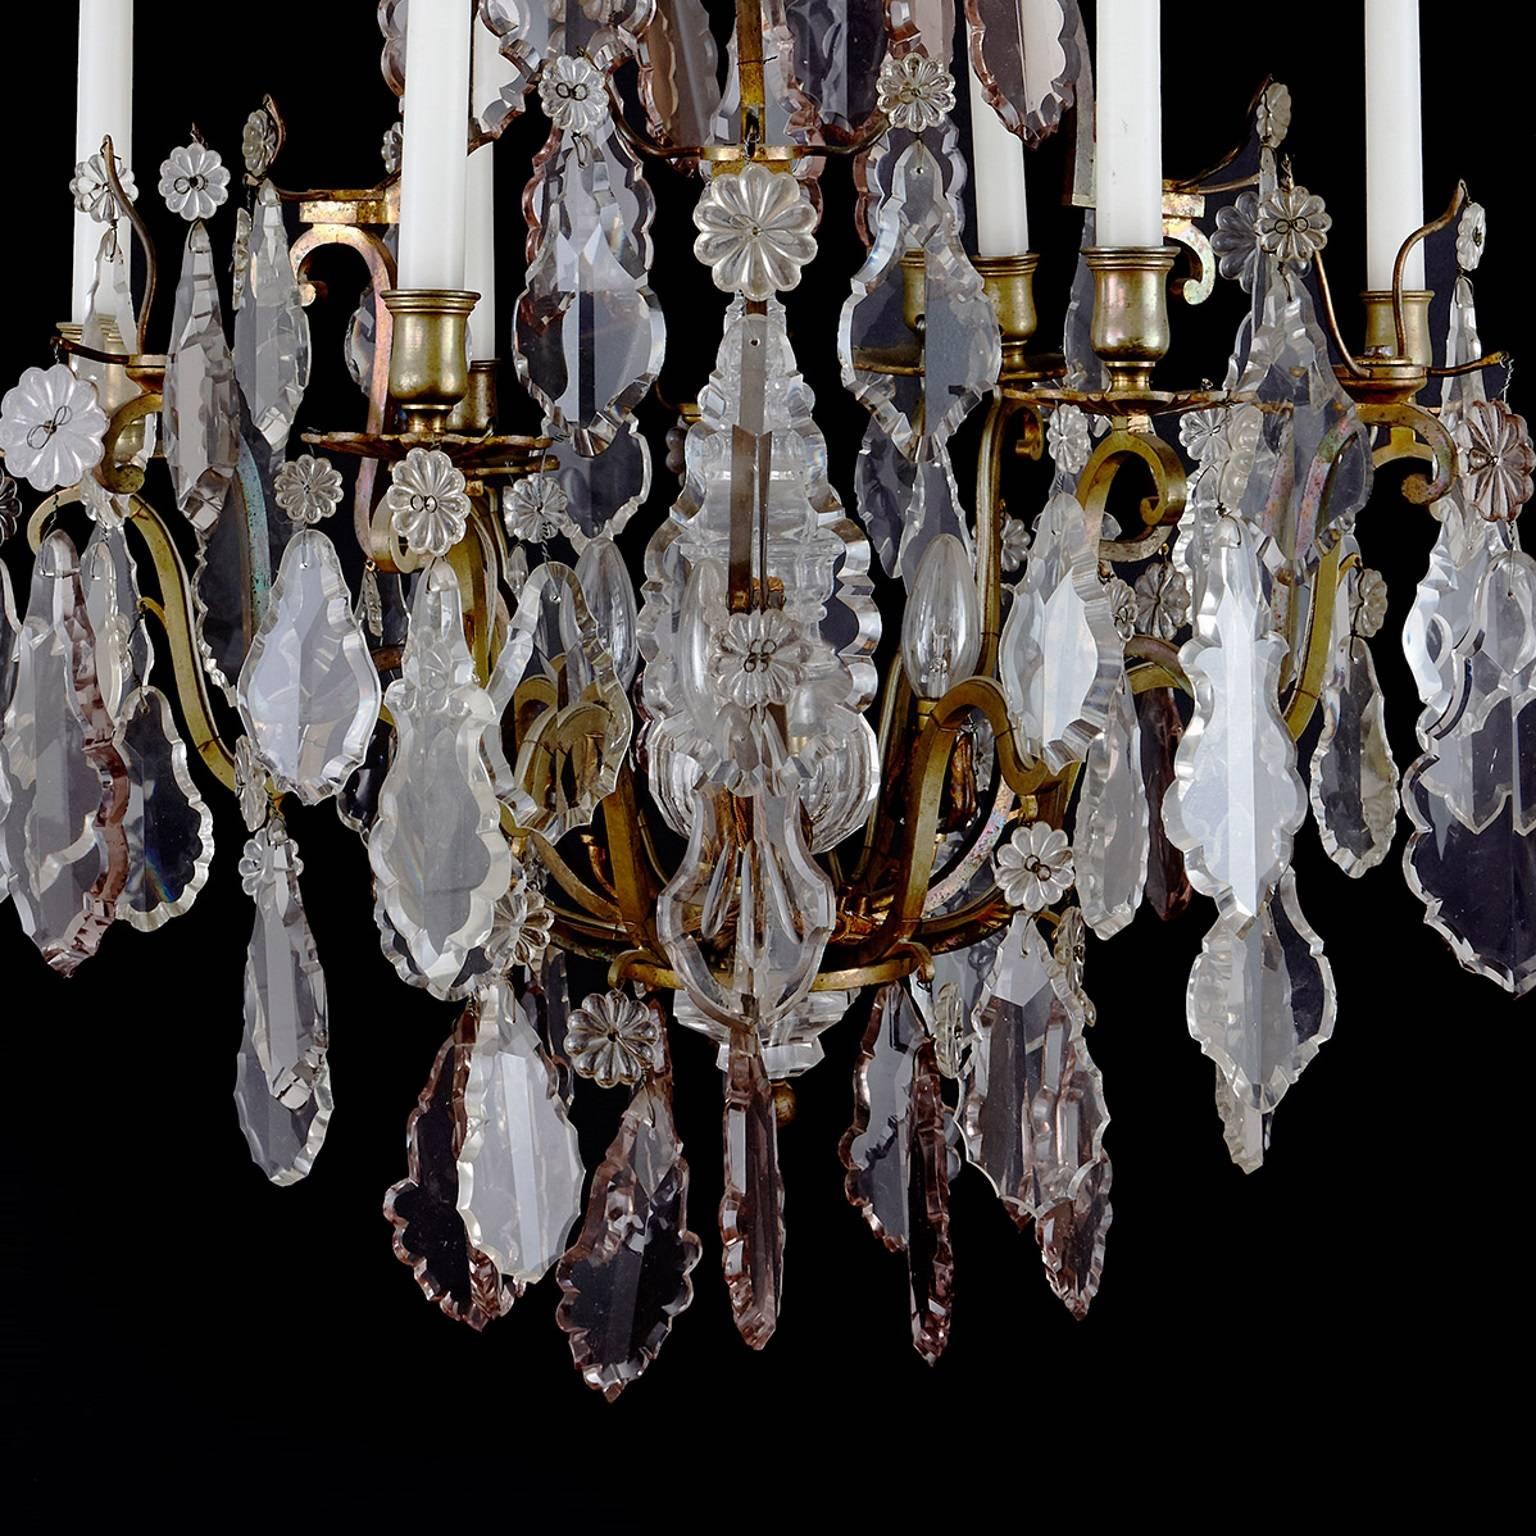 This spectacular French antique chandelier is composed of an impressive ormolu (gilt bronze) central structure that issues six scrolling branches for the lights. Covering the structure are multiple large, cut-glass droplets surmounted by elegantly